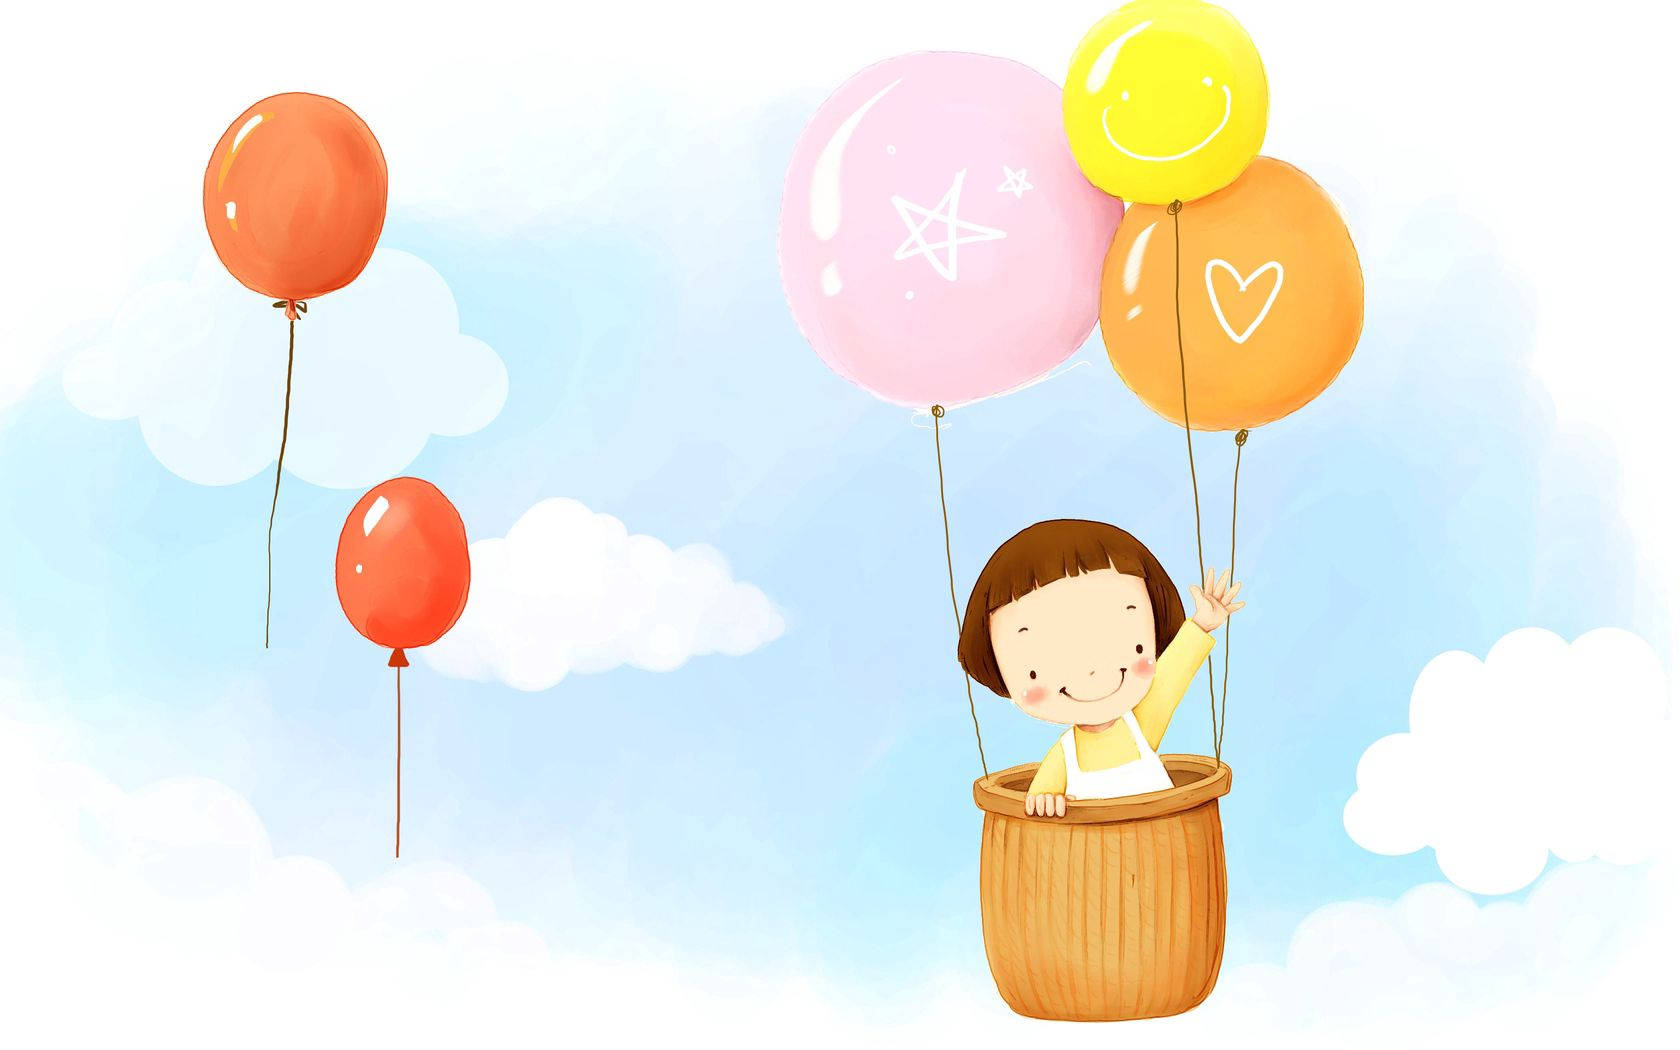 An adorable baby looks with wonder at the colorful balloons in the sky Wallpaper